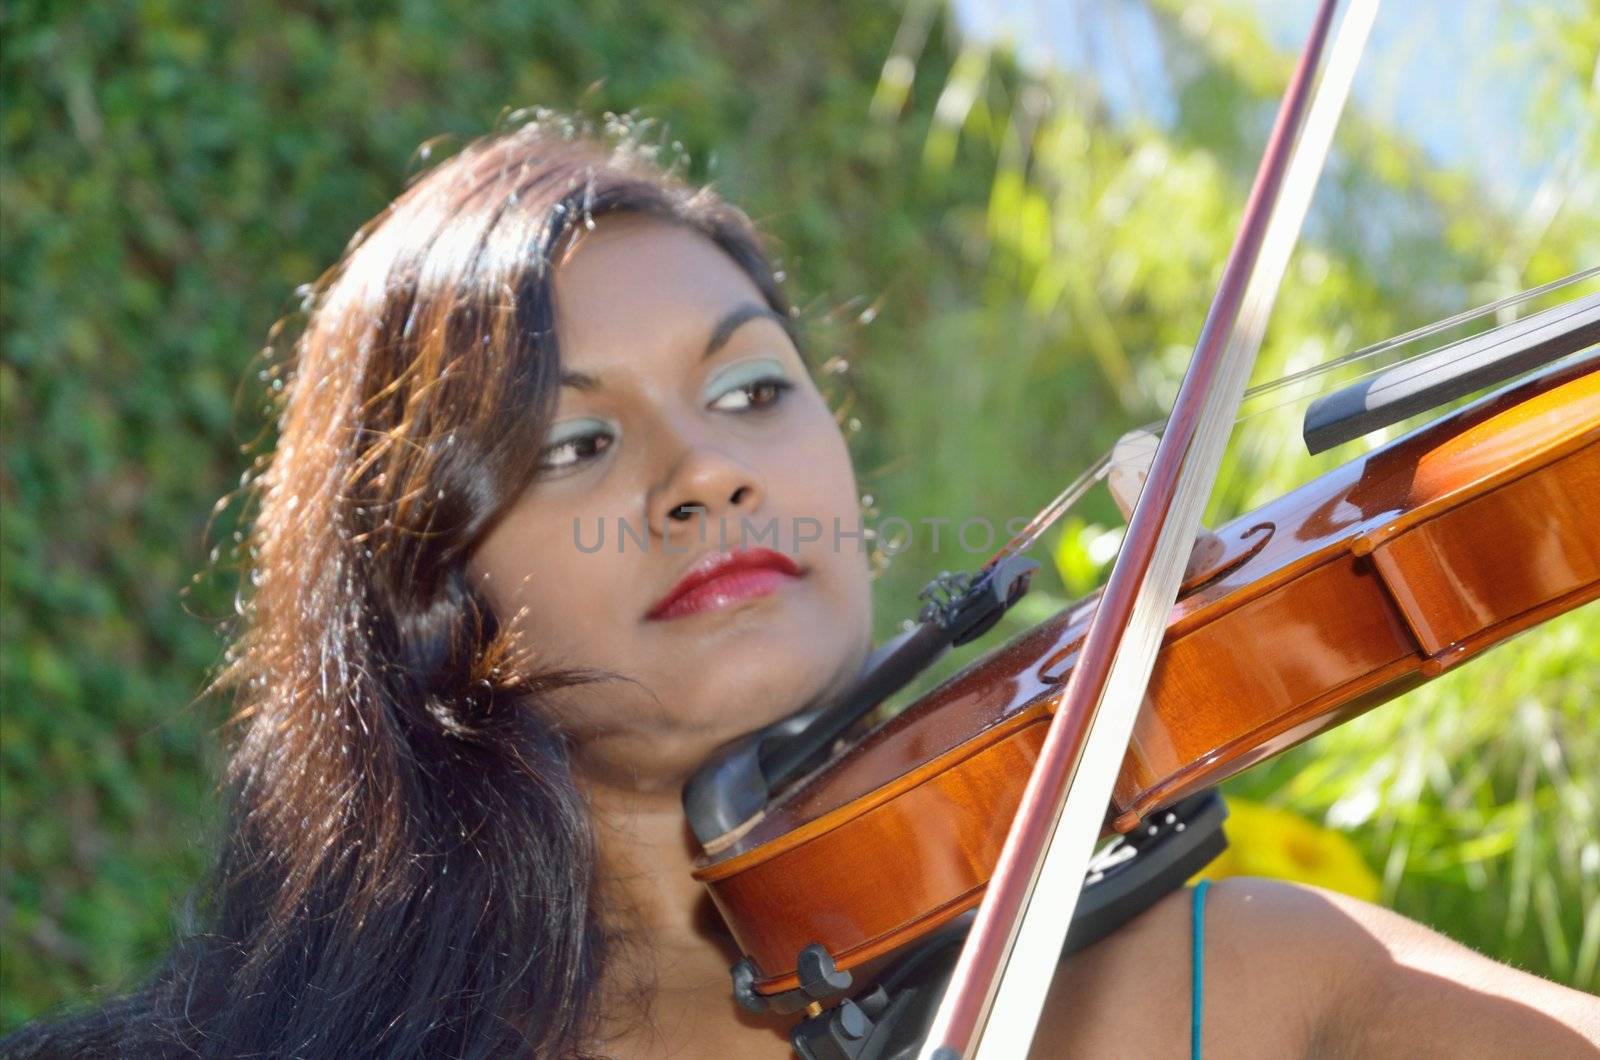 Attractive brunette musician providing live music in the park on her violin